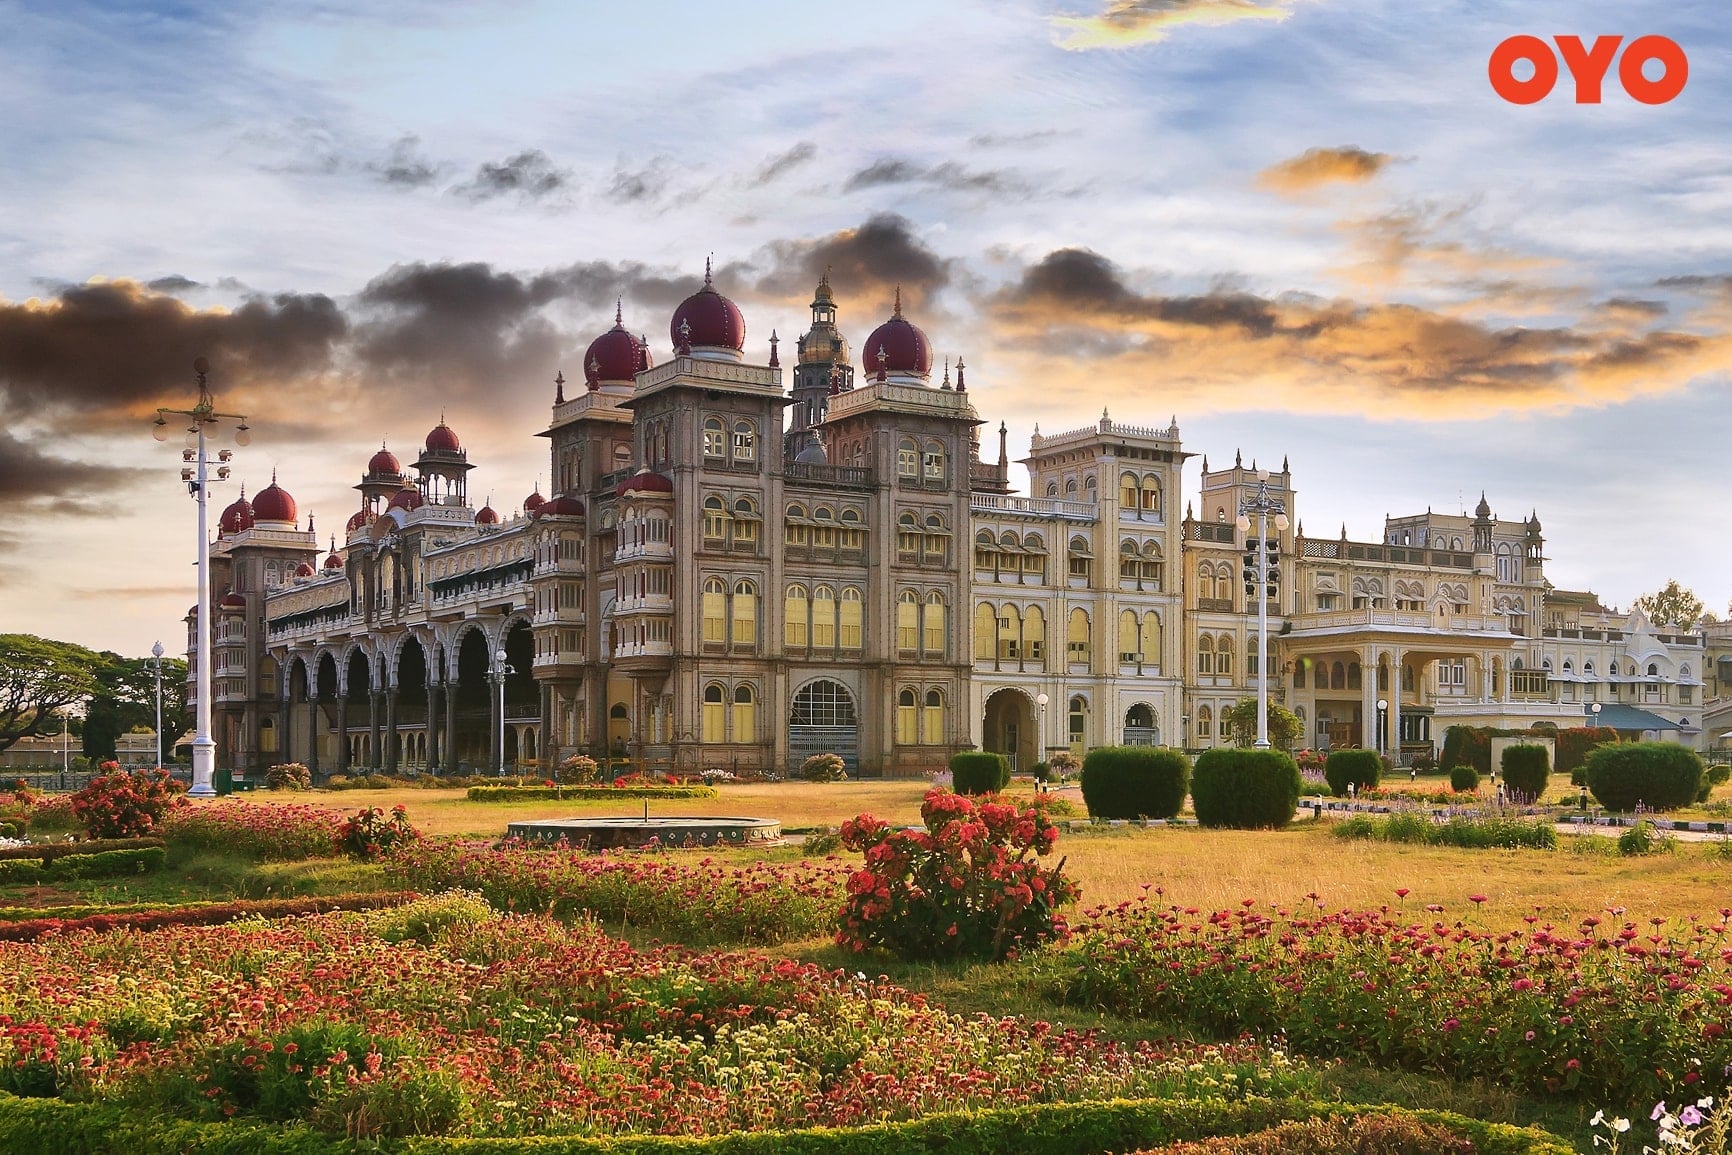 Ambavilas Palace, Mysore - One of the most famous palaces in India